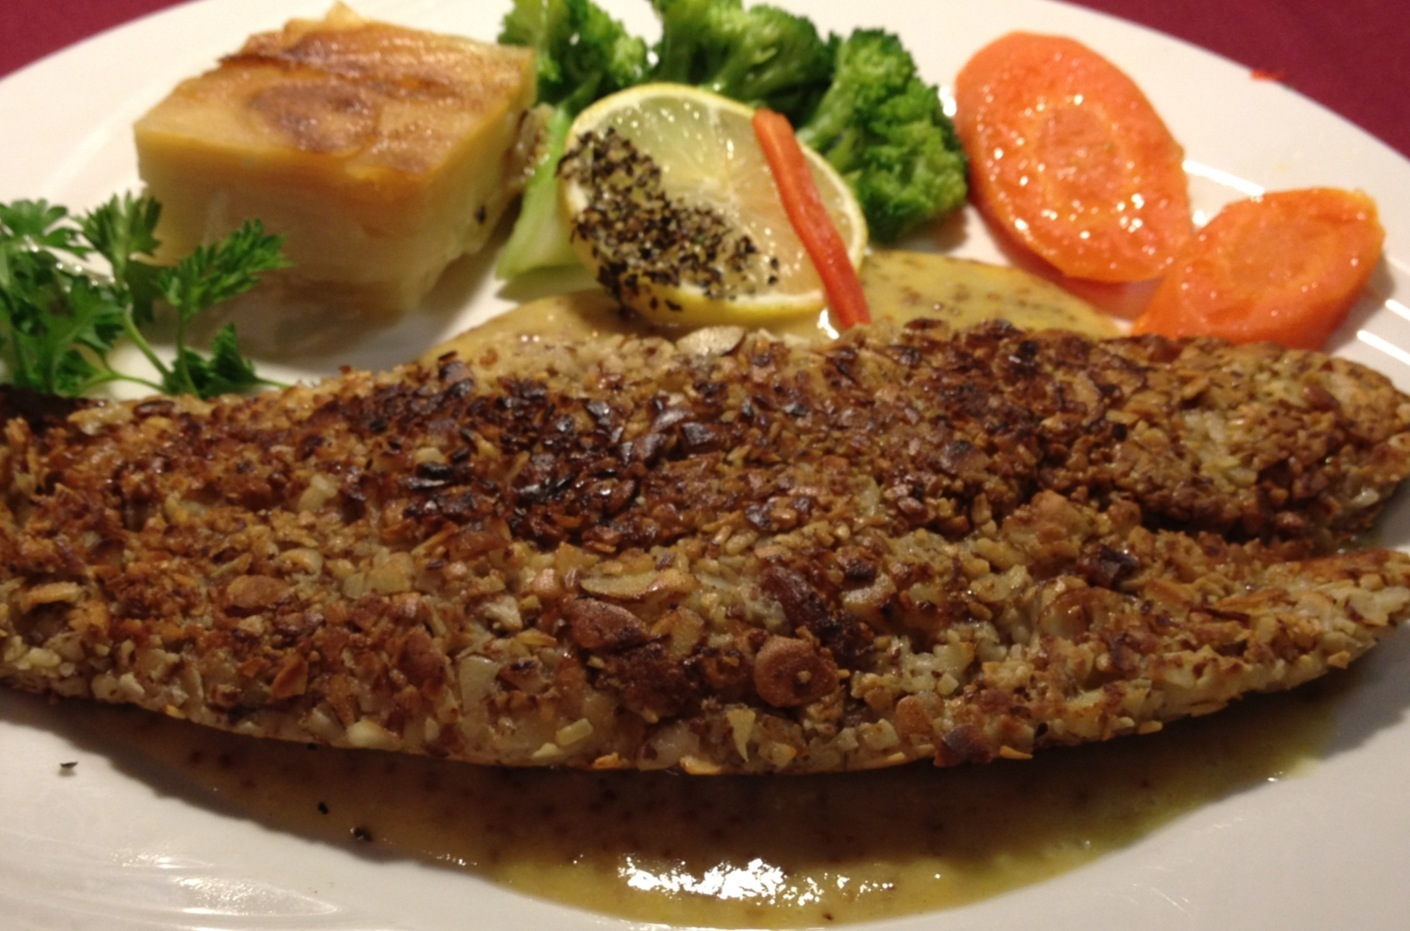 Almond Crusted Sole Fillet with Warm Honey-Mustard Sauce